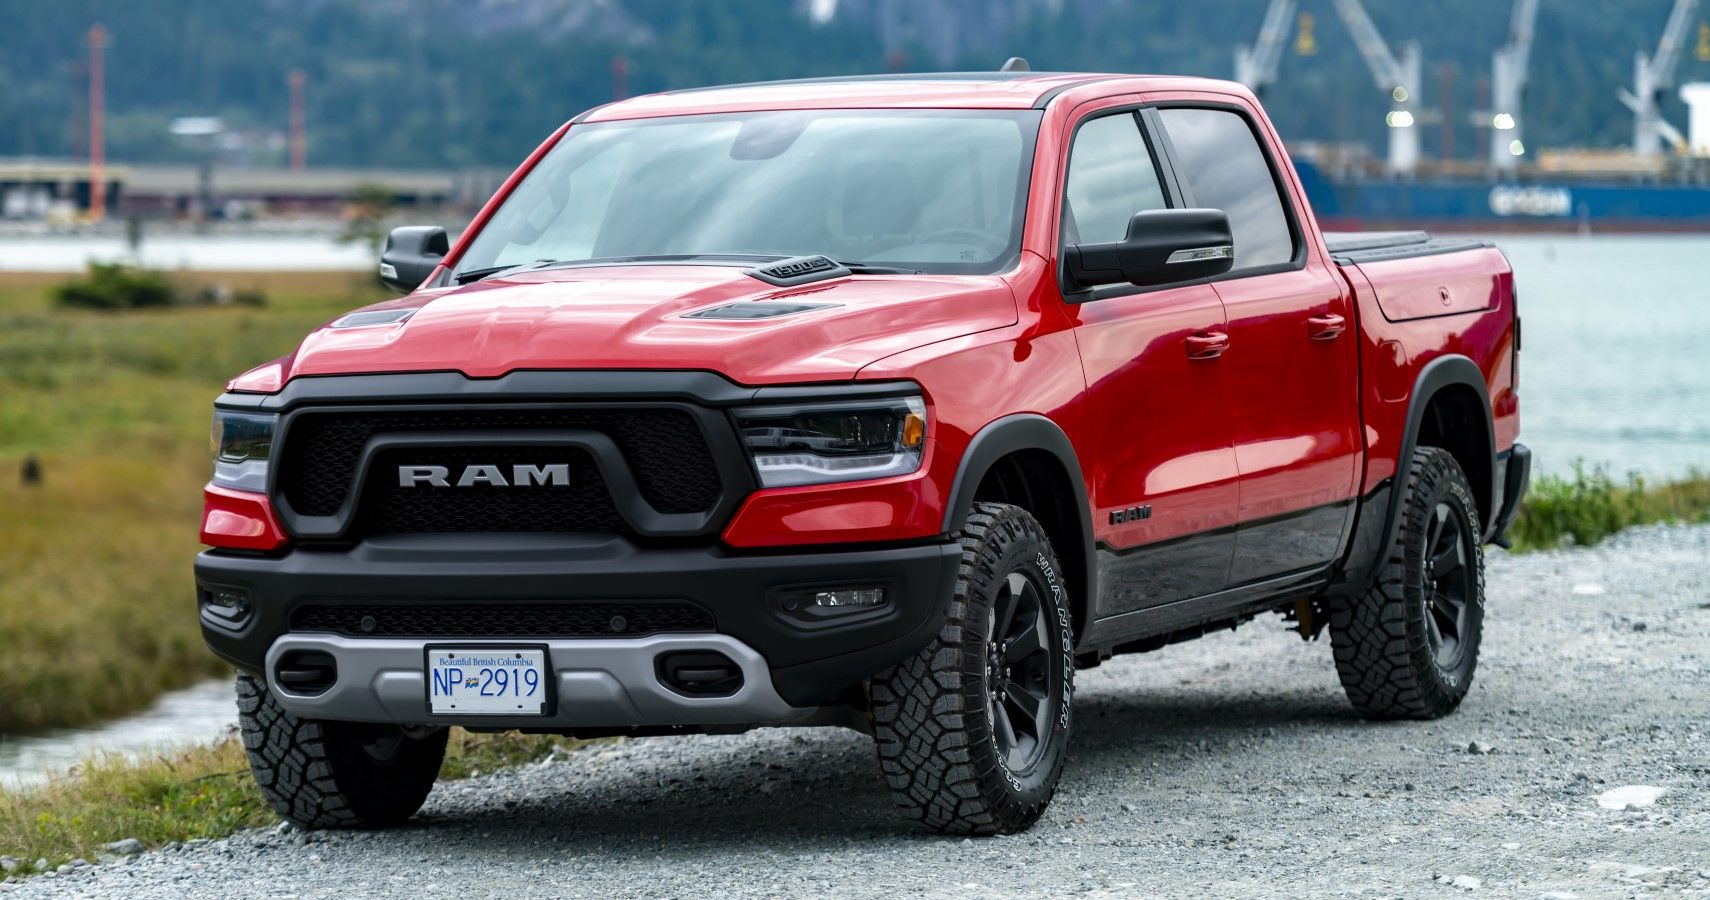 Ram 1500 Rebel from the front of the third quarter